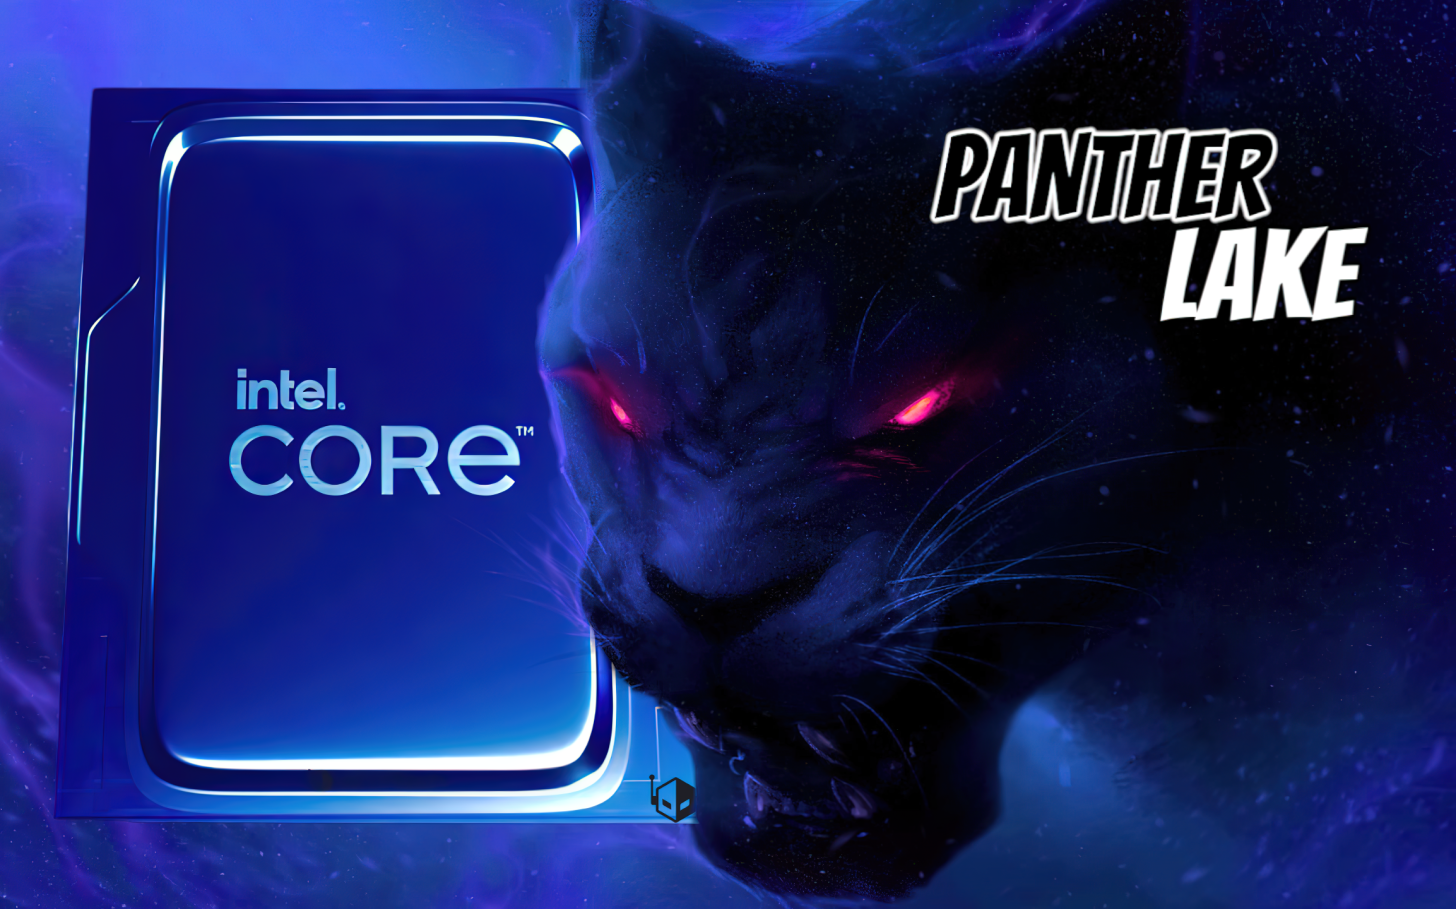 Intel-Panther-Lake-CPUs-Feature-1456x909.png